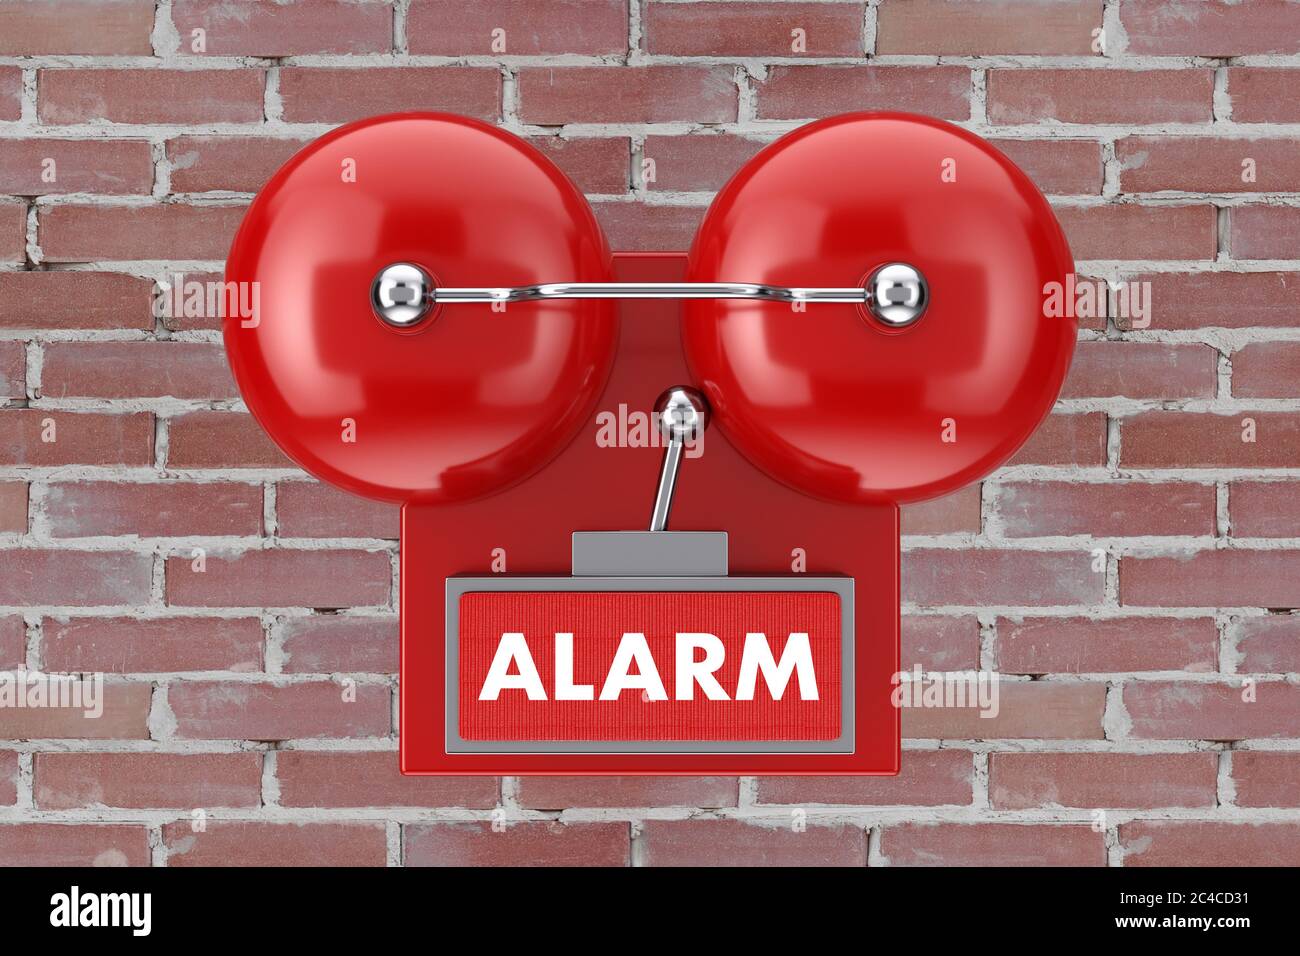 Red Fire Alarm Bell System on a brick wall background. 3d Rendering Stock Photo